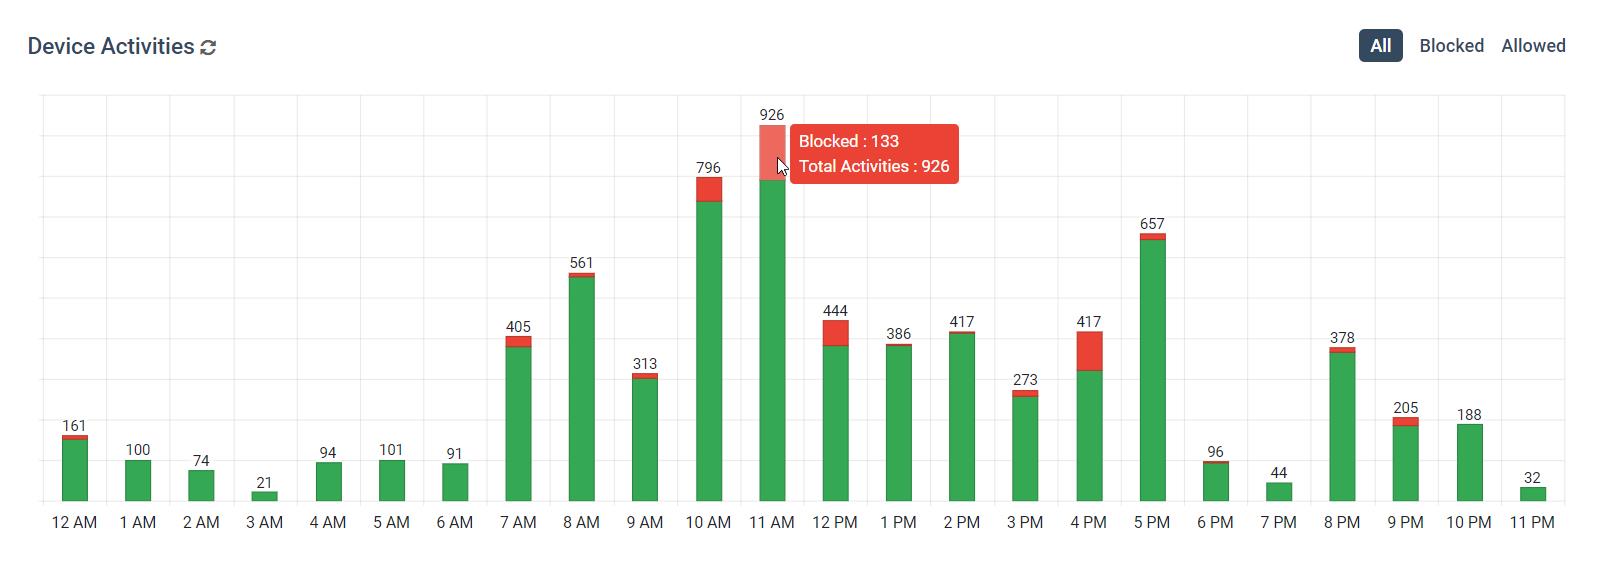 Graph of an hourly timeline showing blocked vs allowed USB devices